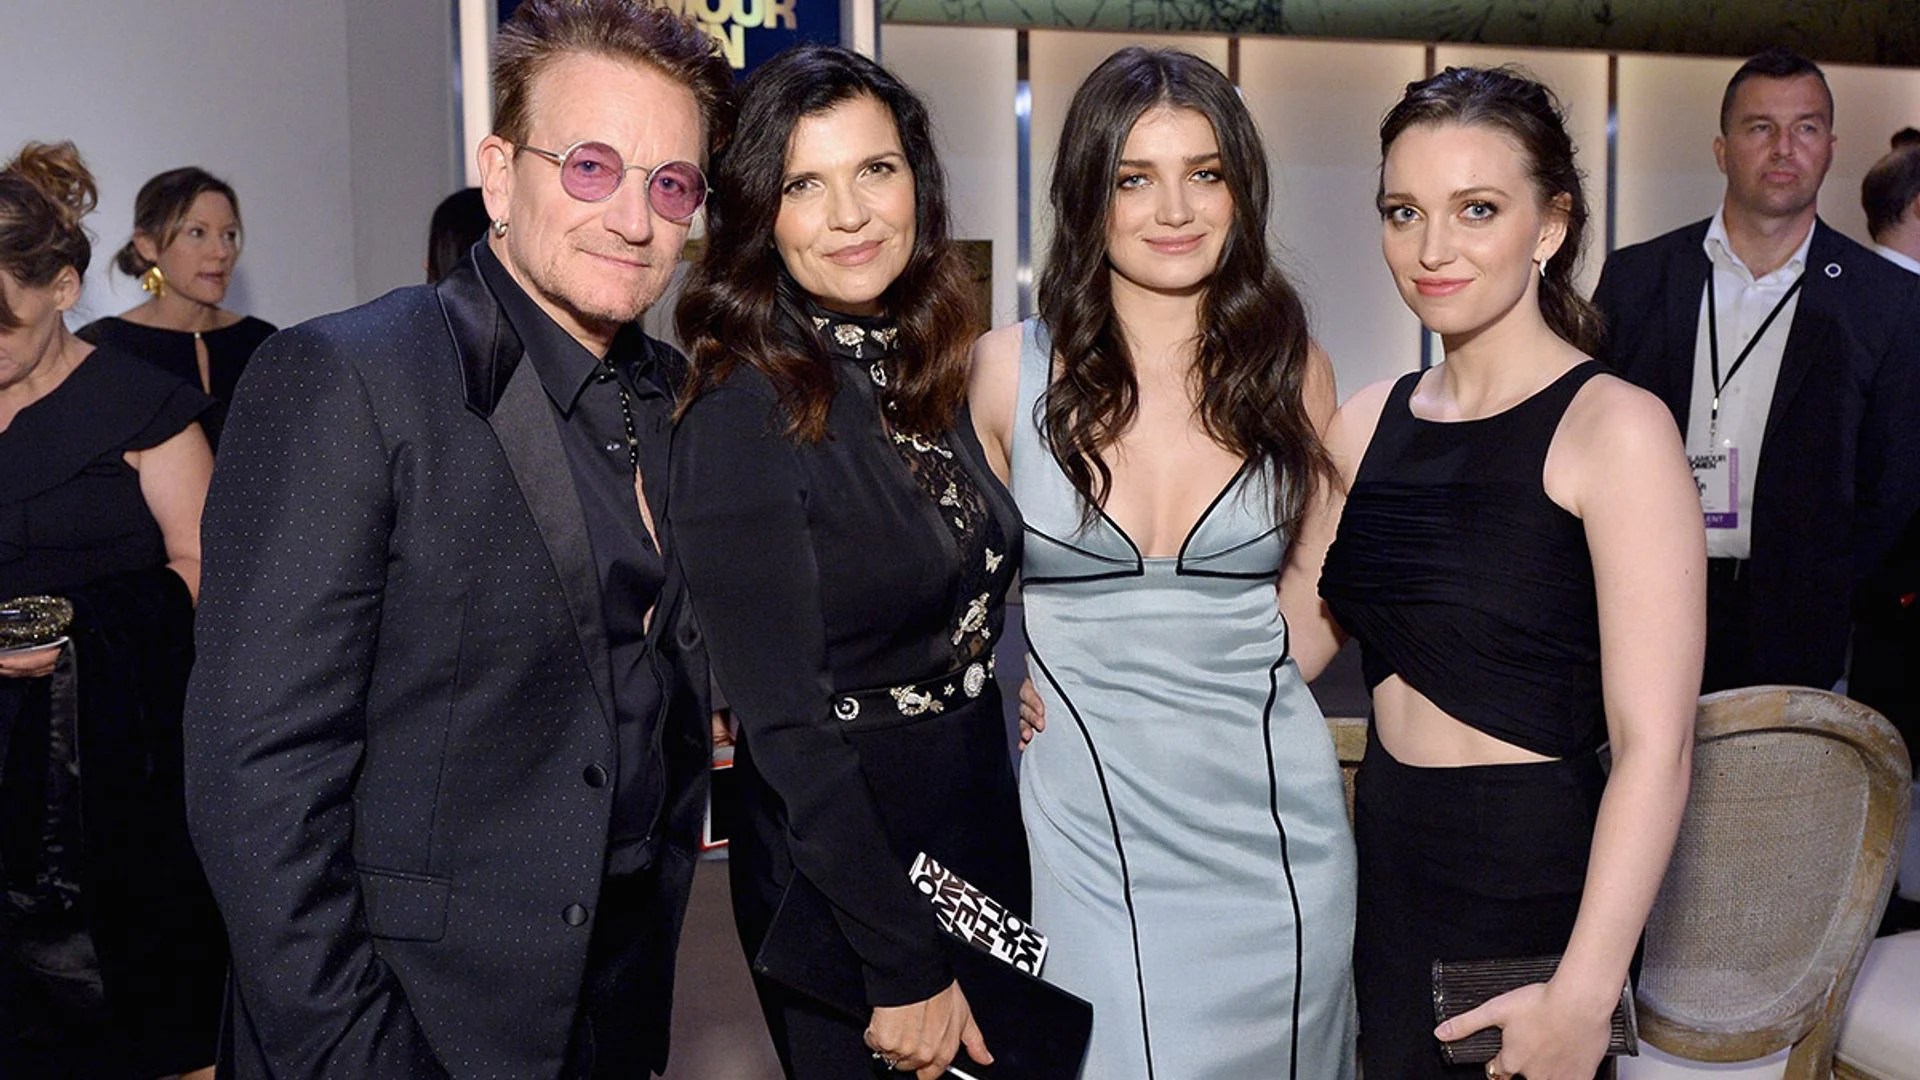 Bono's four famous children with wife Ali everything you need to know